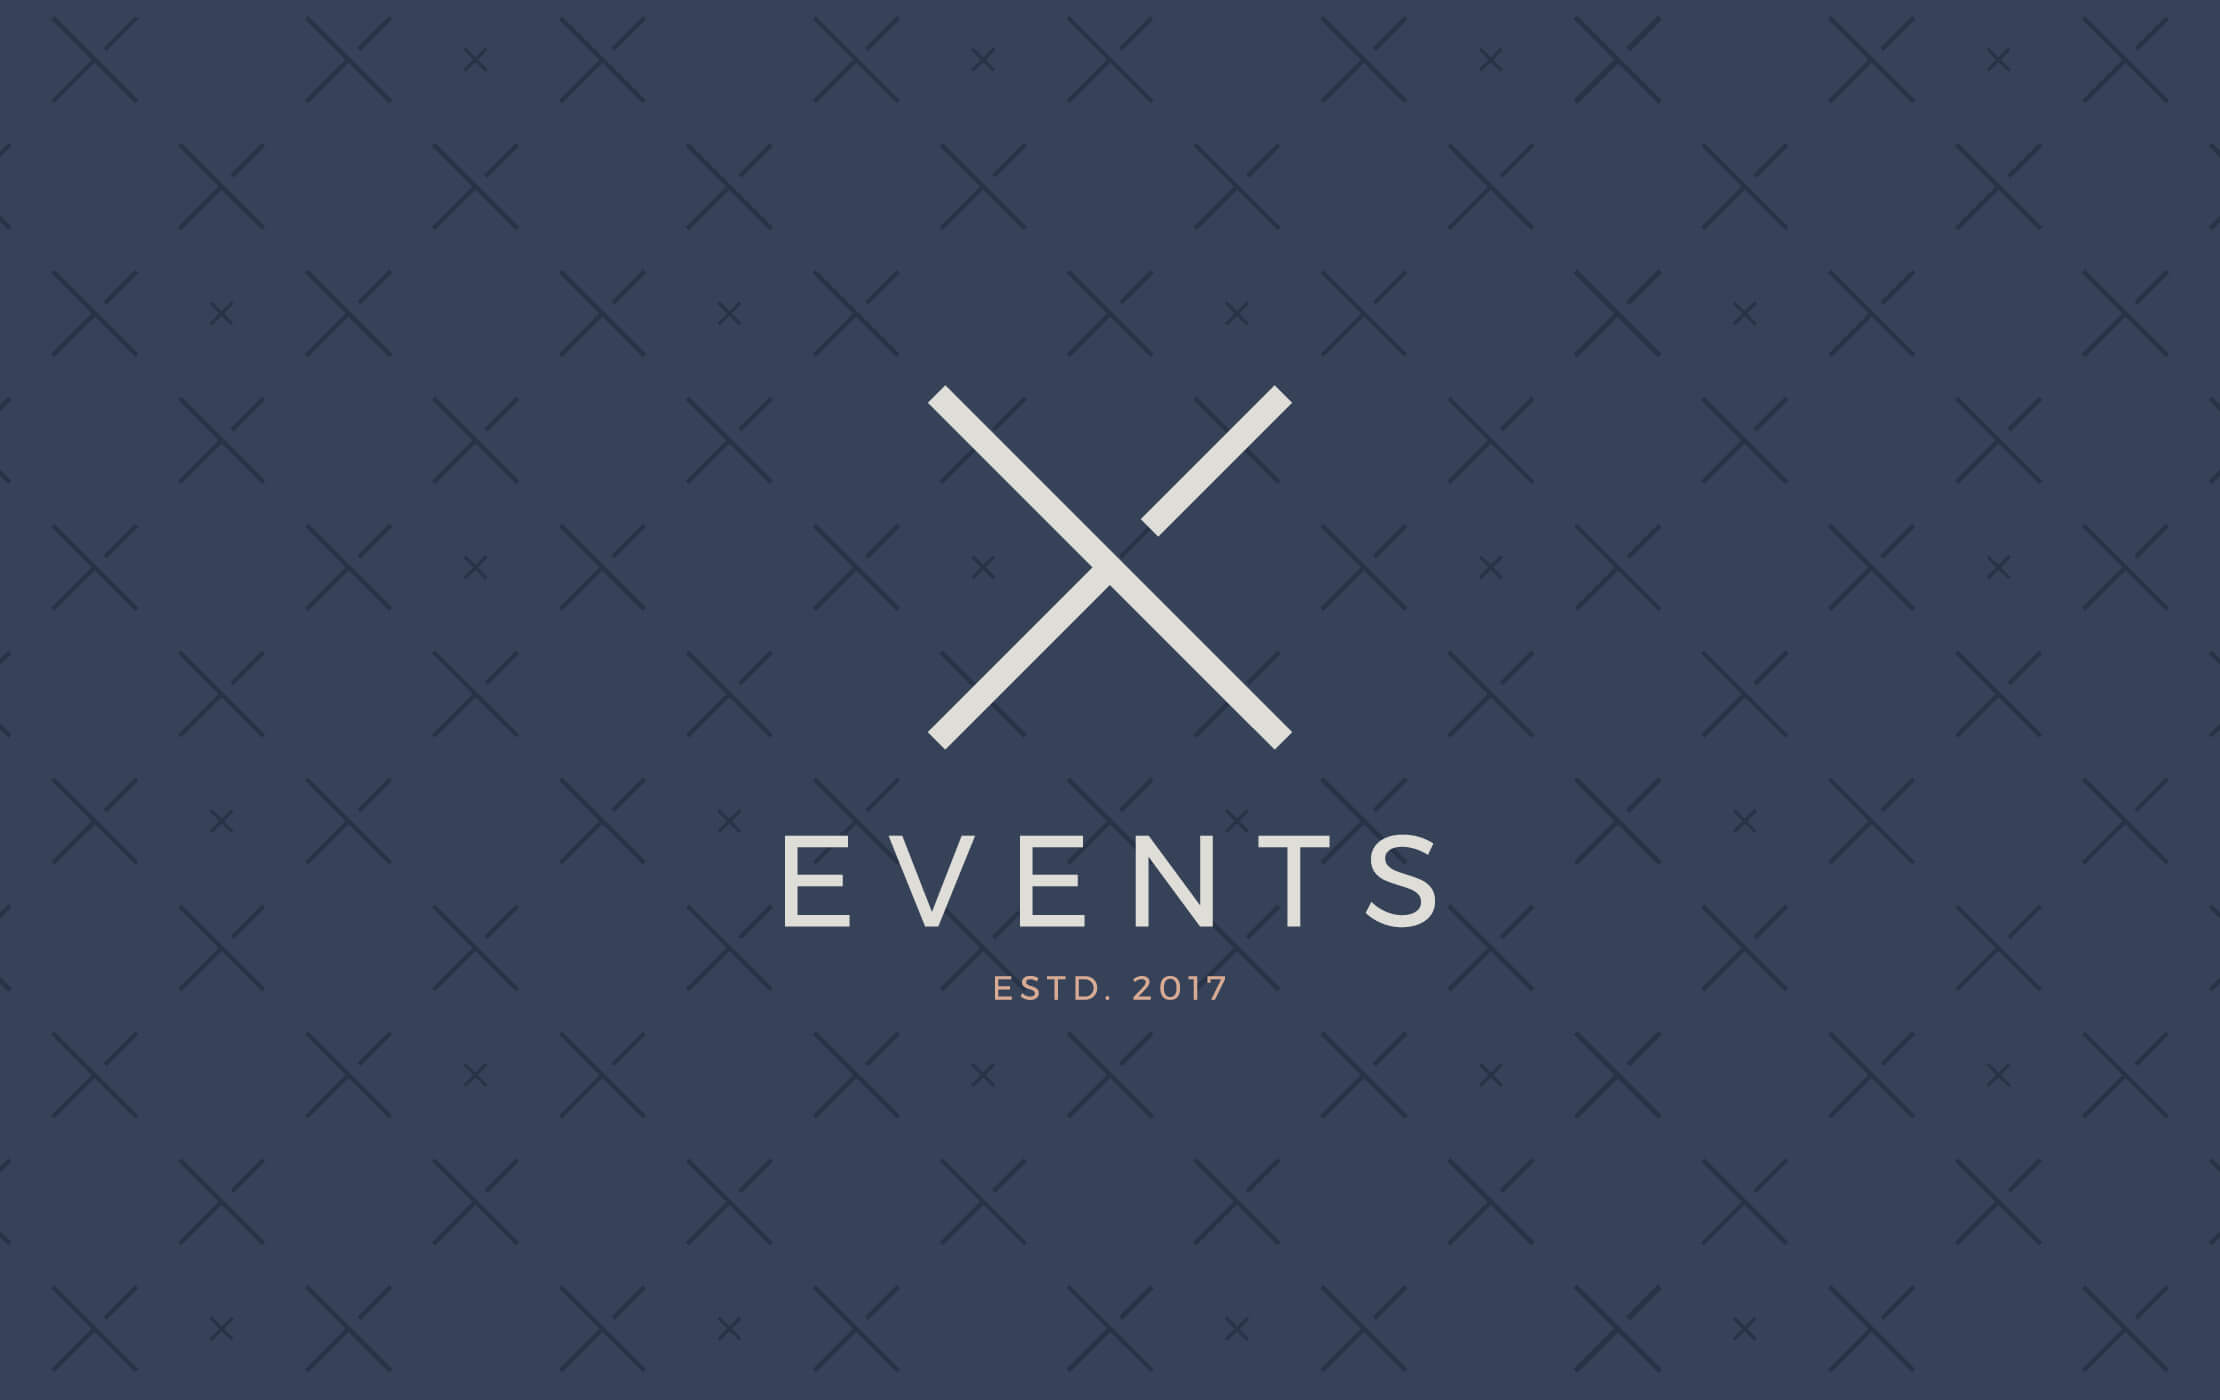 X Events primary logo, in grey and pink, on a dark blue pattern background